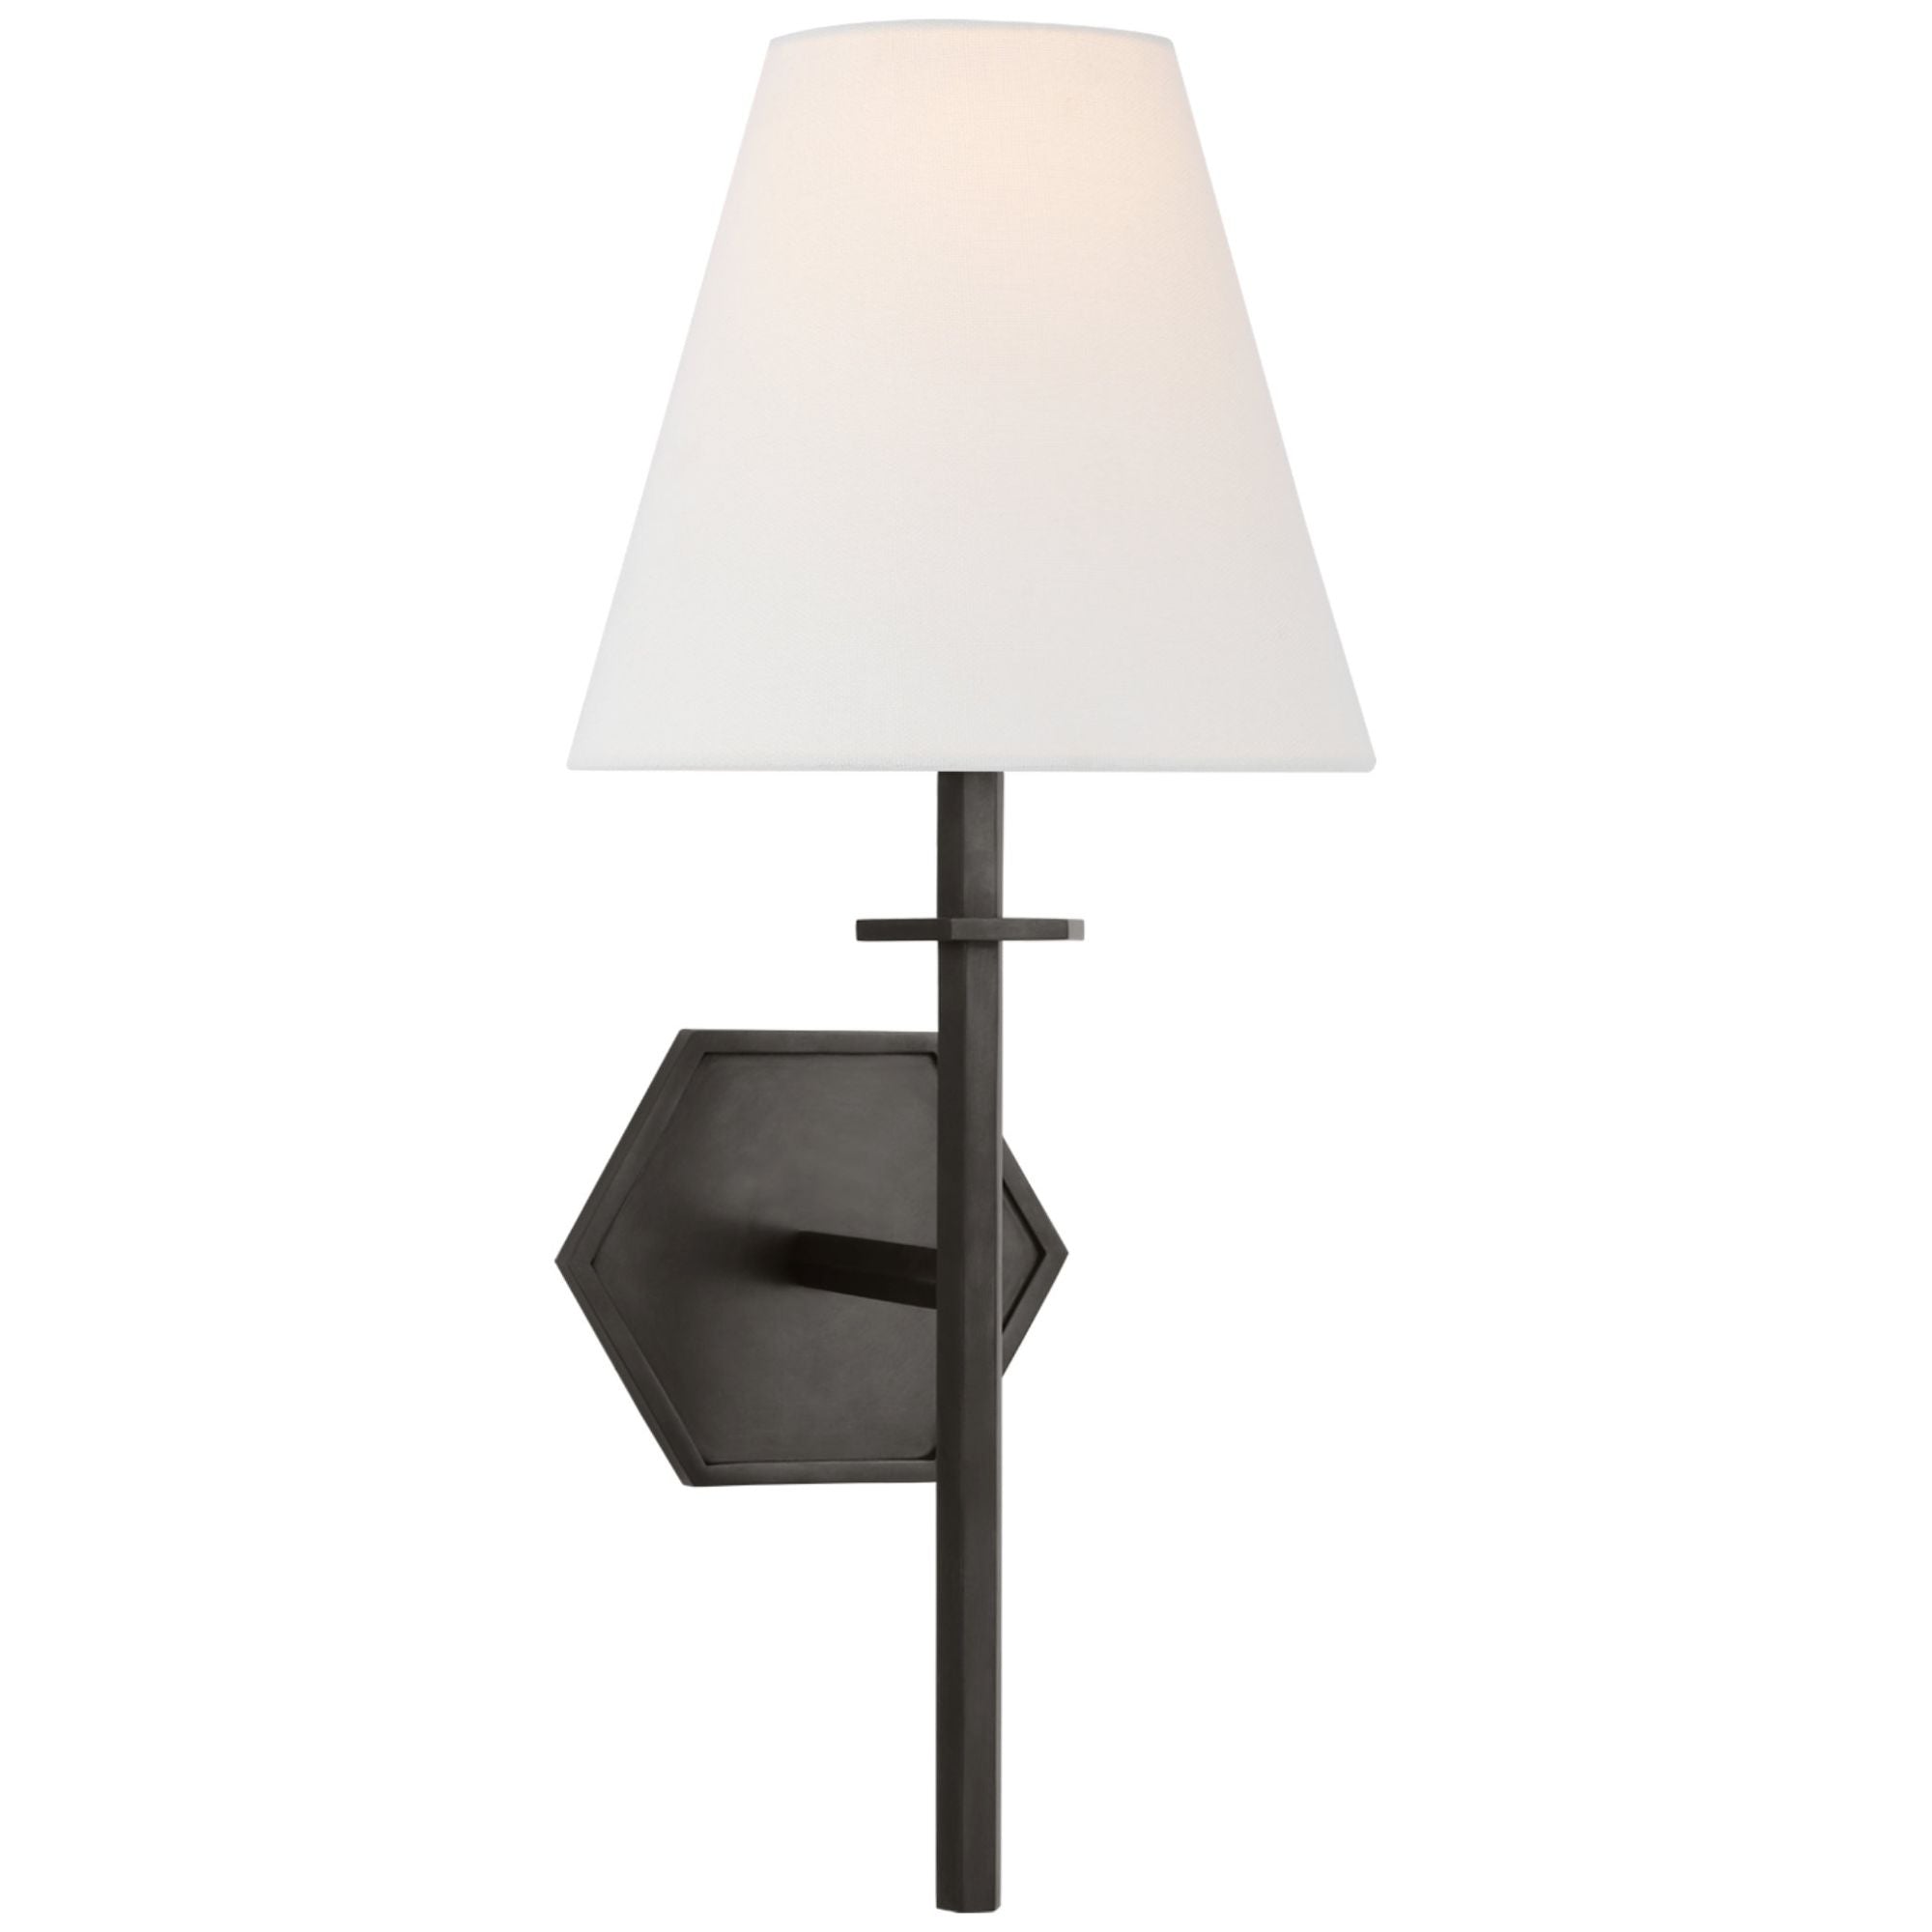 Paloma Contreras Olivier Medium Sconce in Bronze with Linen Shade